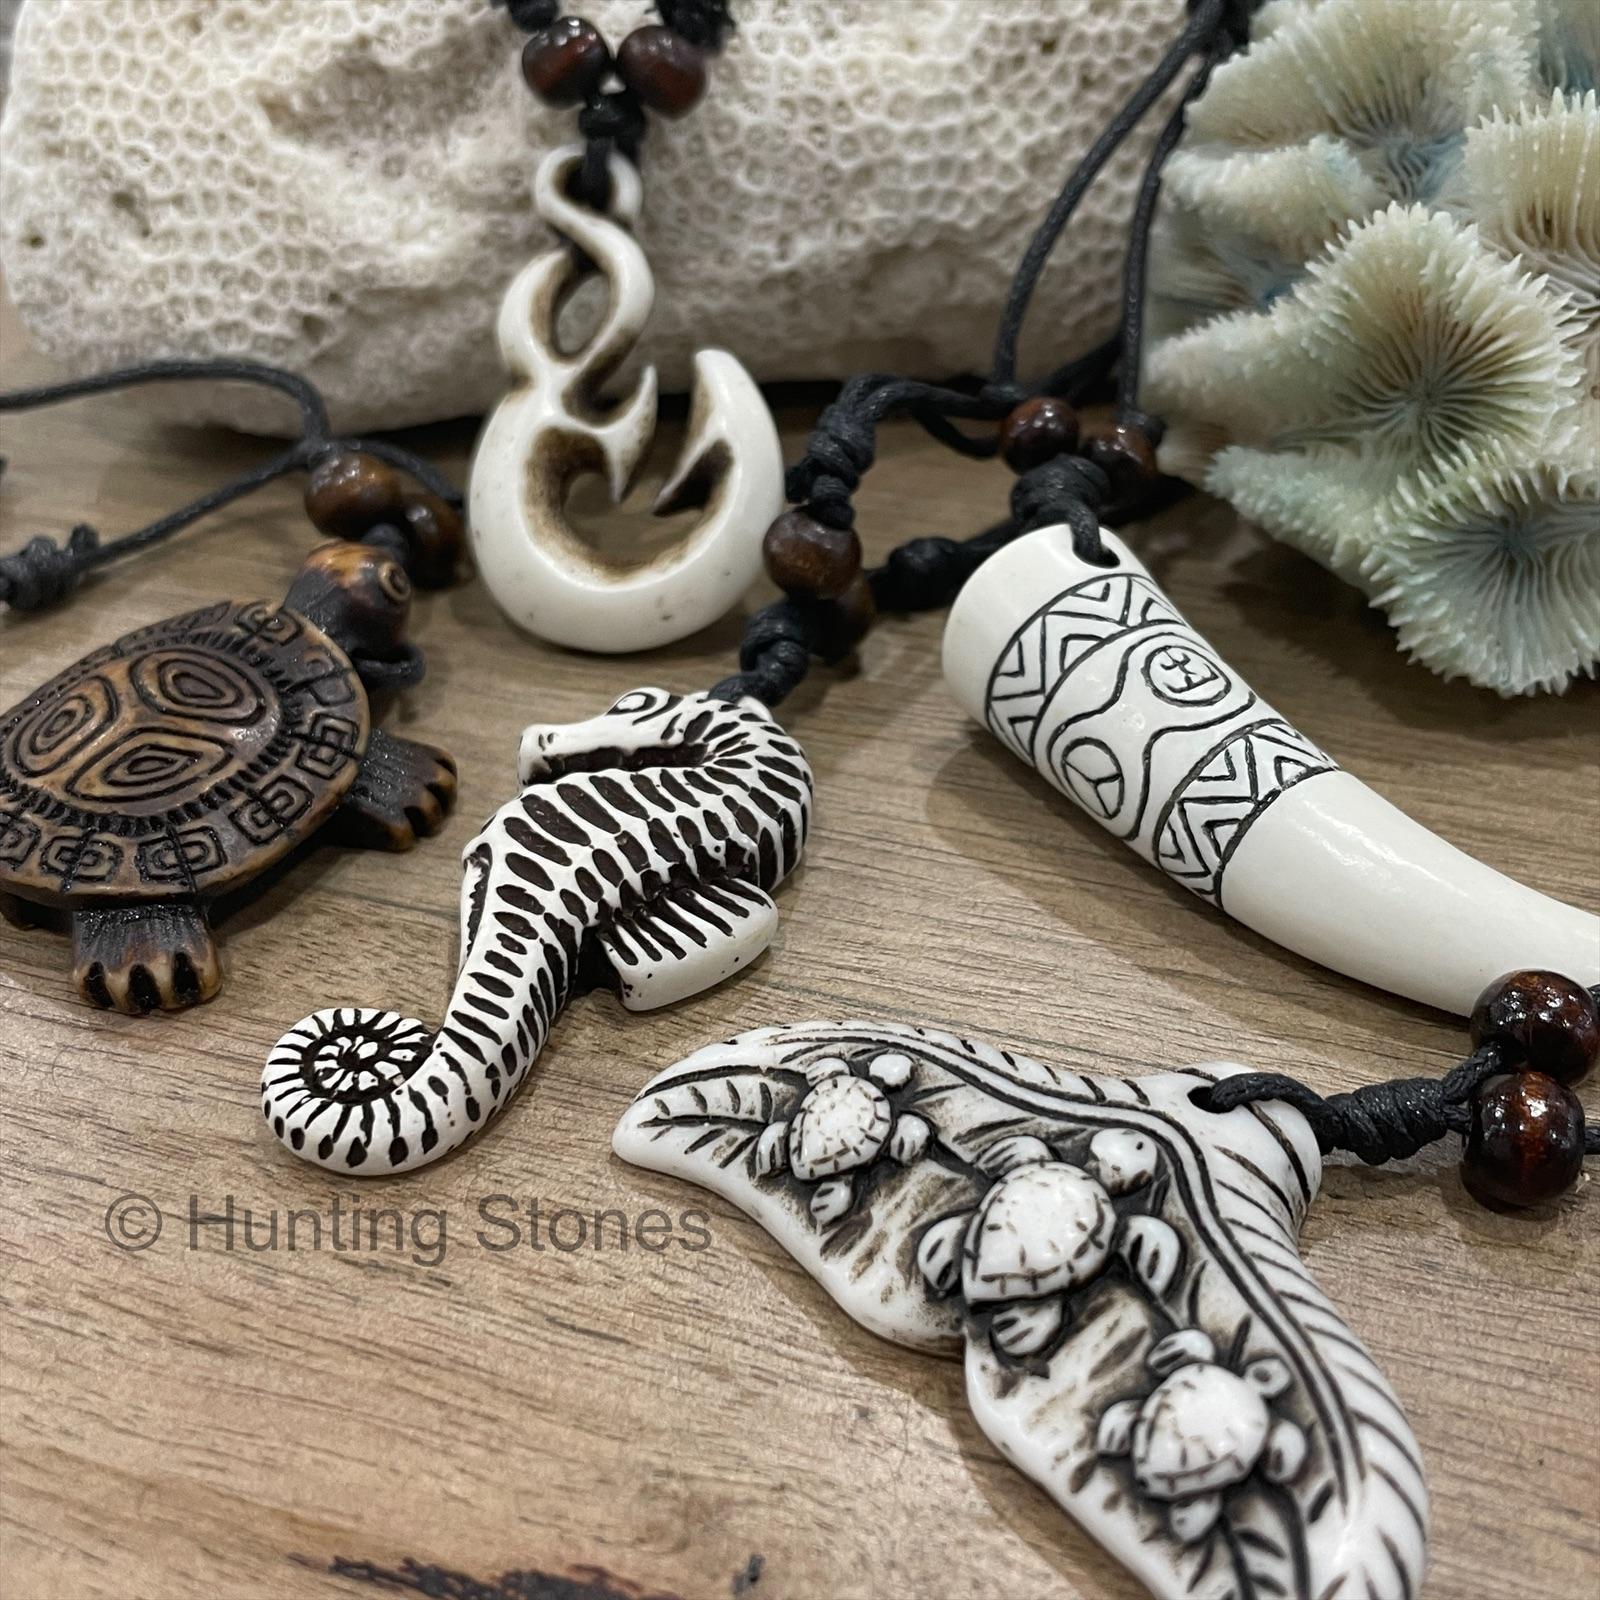 Hunting Stones Unisex Surfer Necklaces